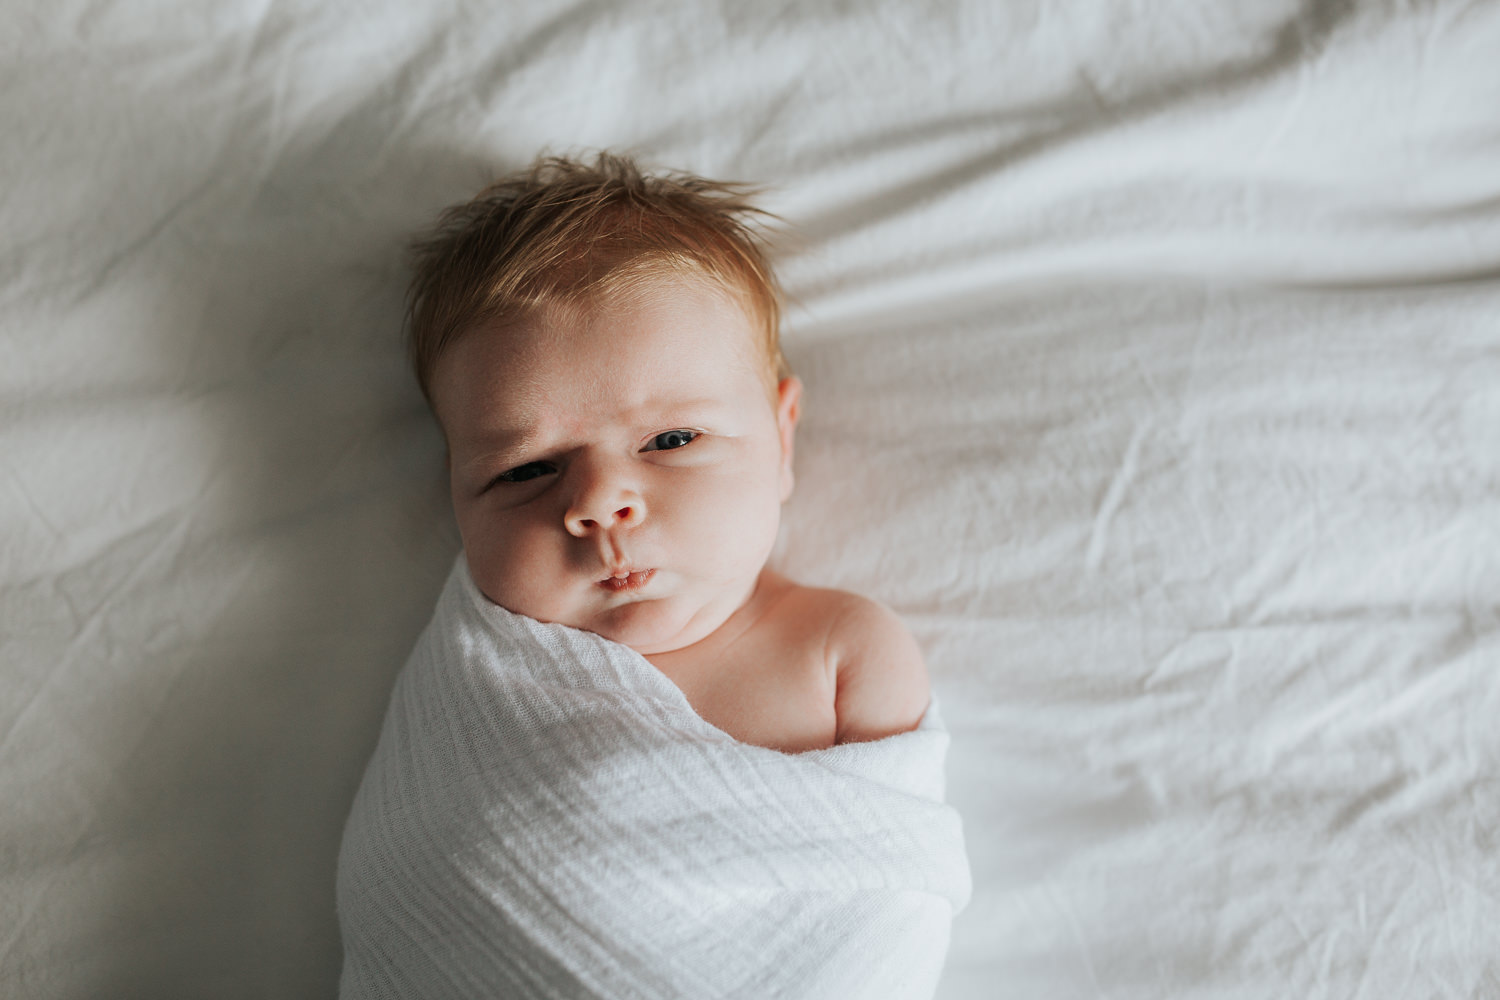 2 week old baby girl with red hair in white swaddle looking at camera - Newmarket Lifestyle Photography